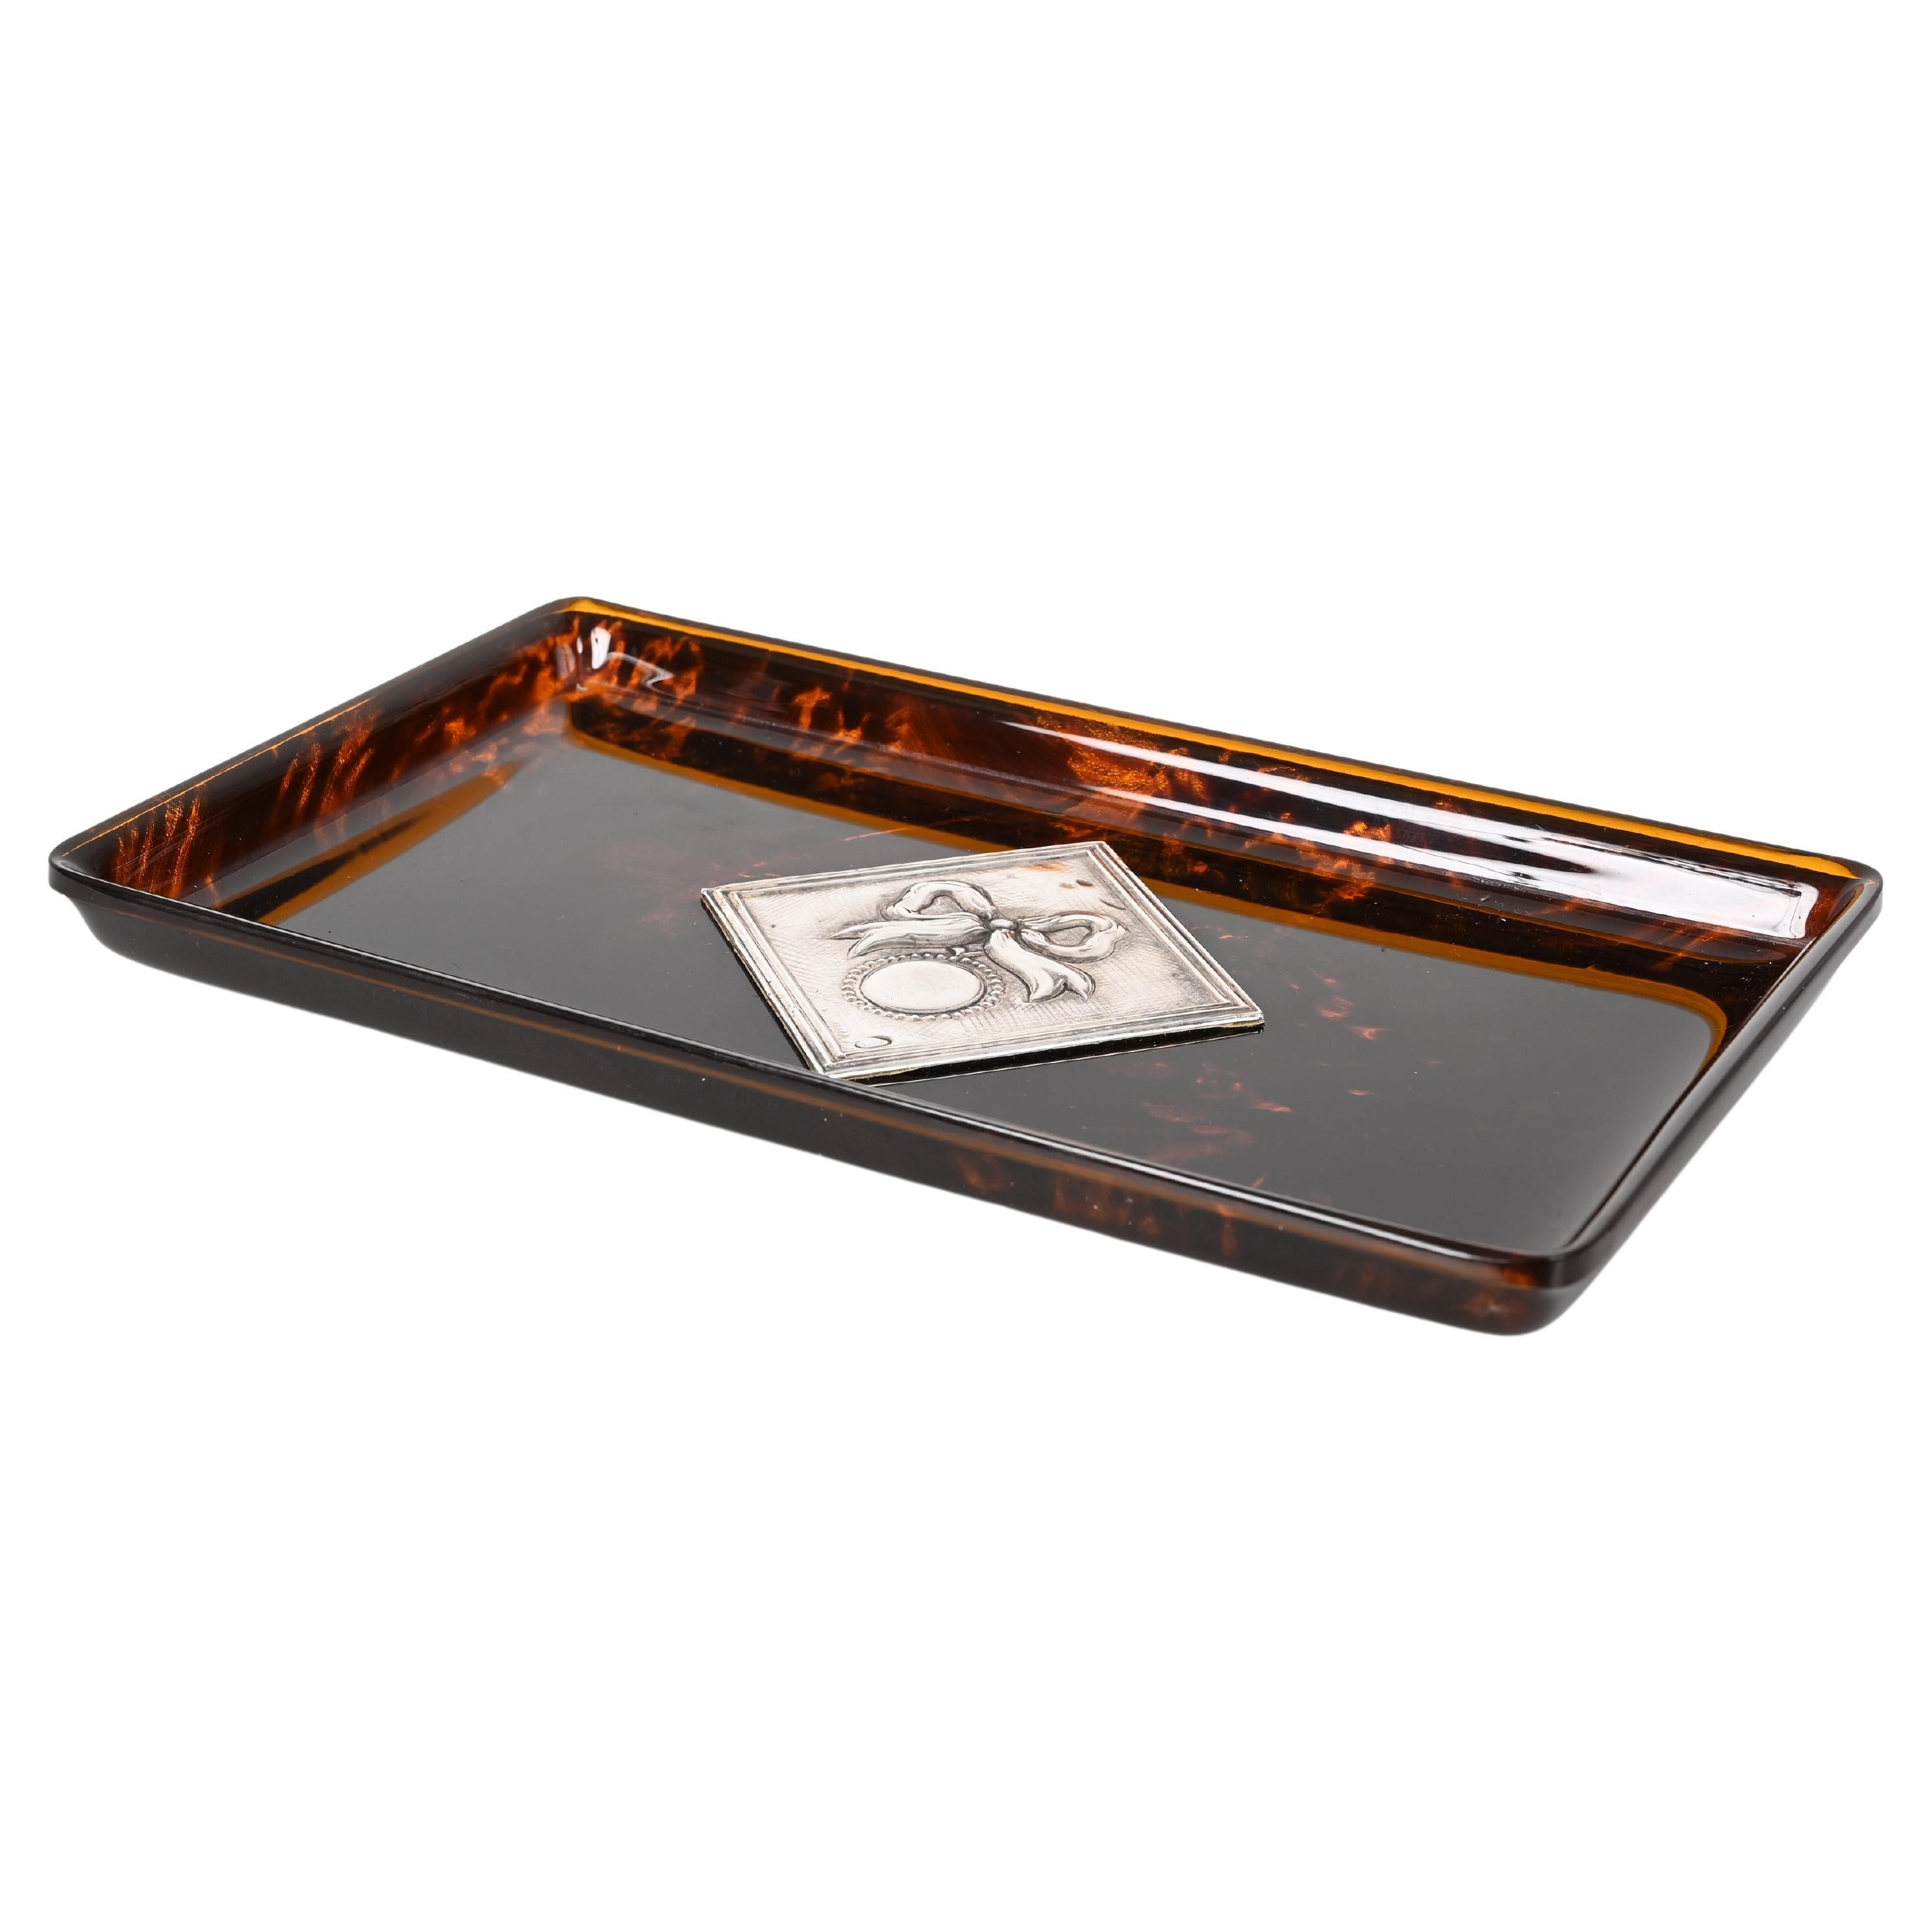 Midcentury Tortoiseshell Lucite and Silver French Serving Tray after Dior, 1970s For Sale